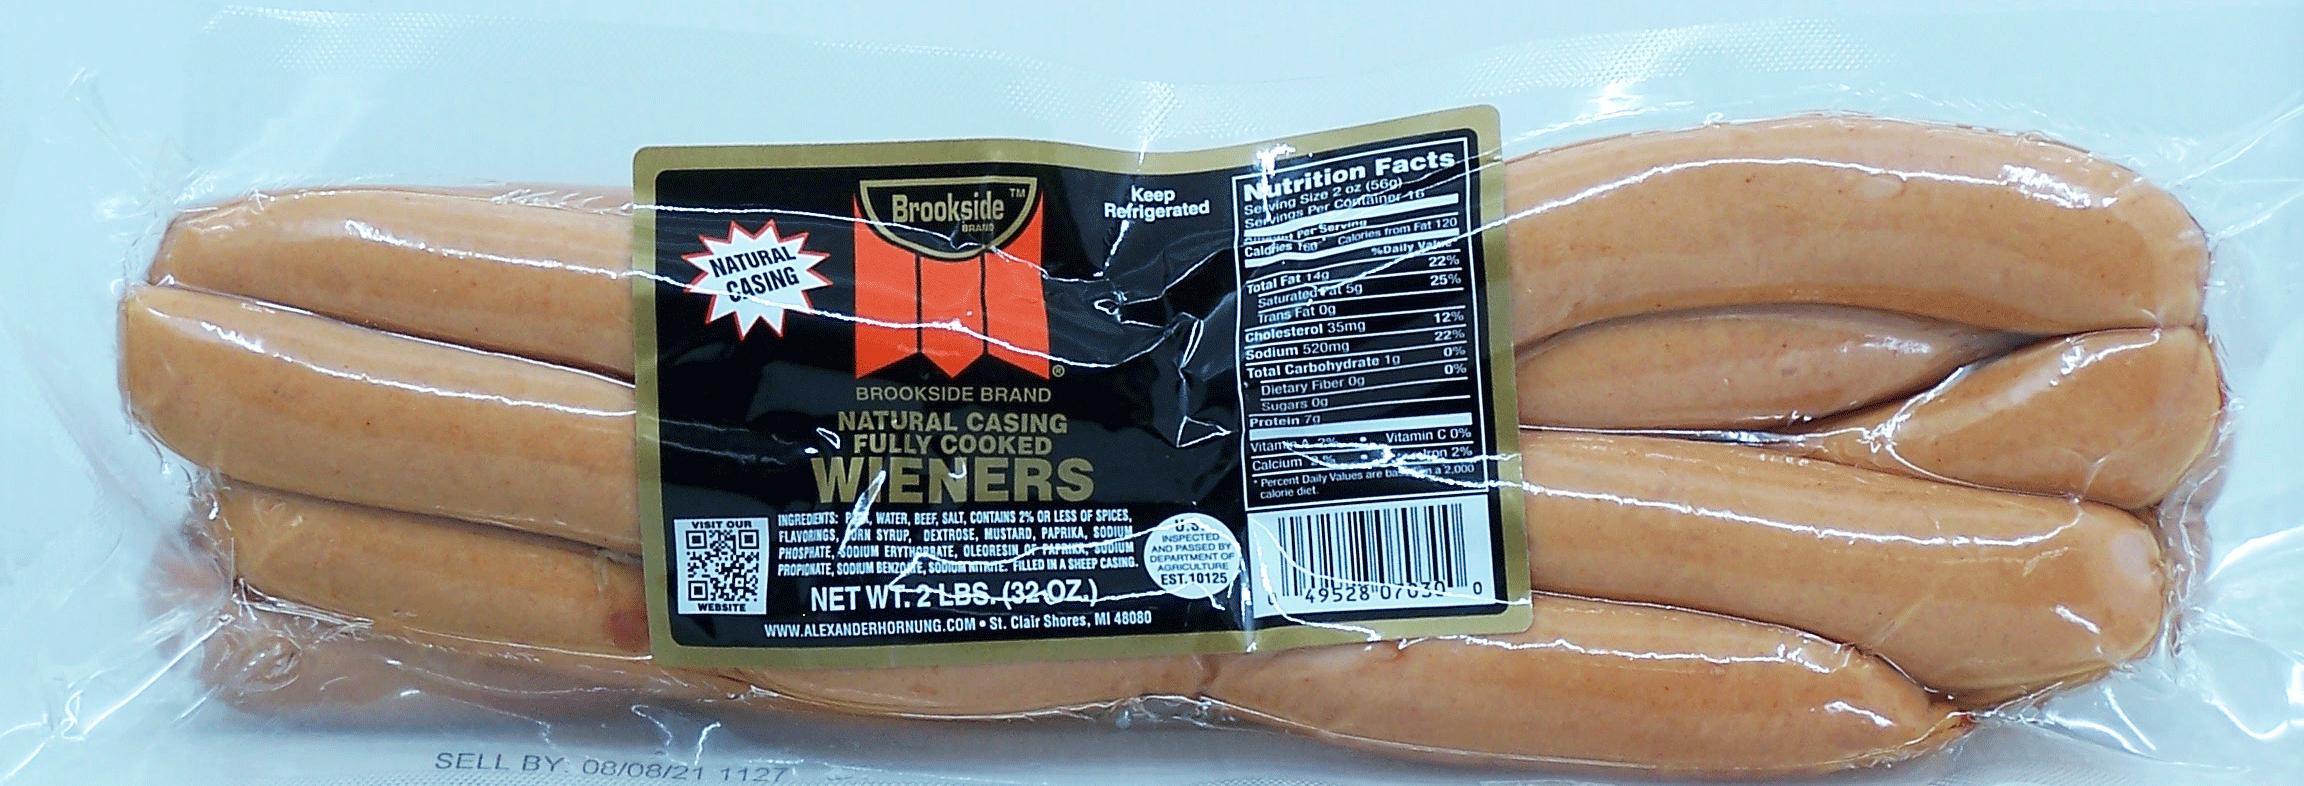 Brookside  wieners, fully cooked, natural casing Full-Size Picture